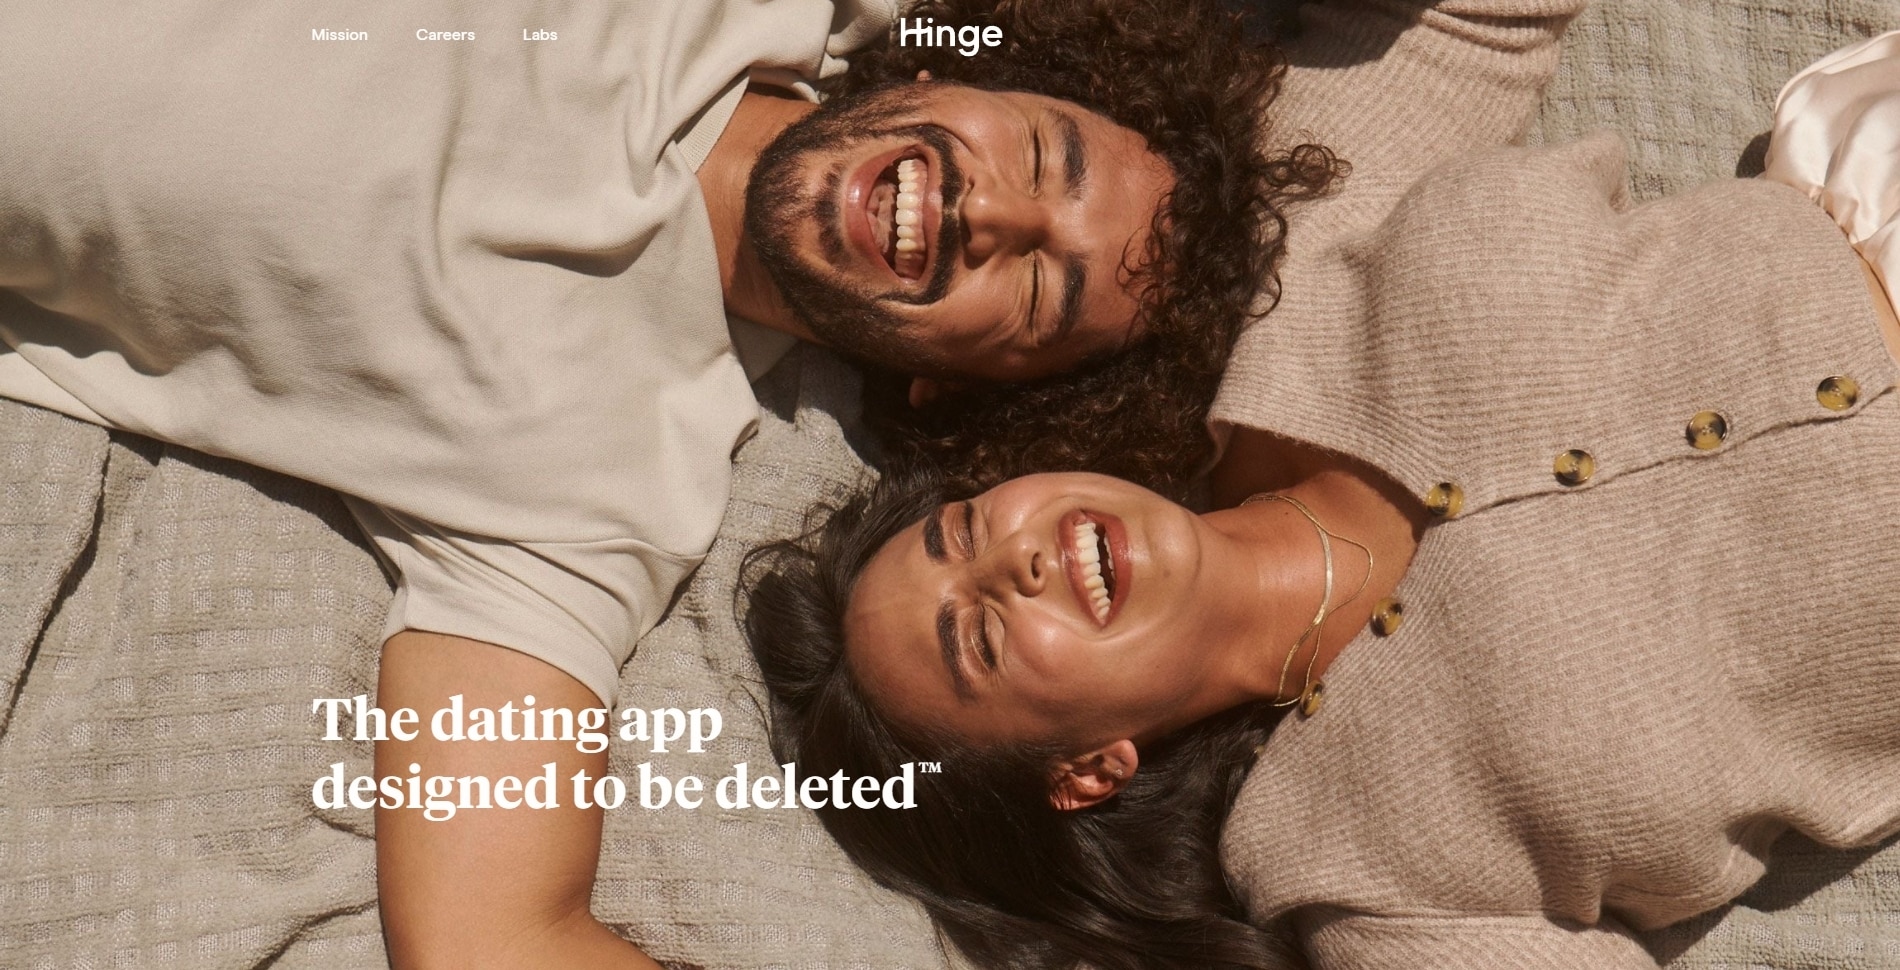 How Good Is Dating App Hinge For Gay Men